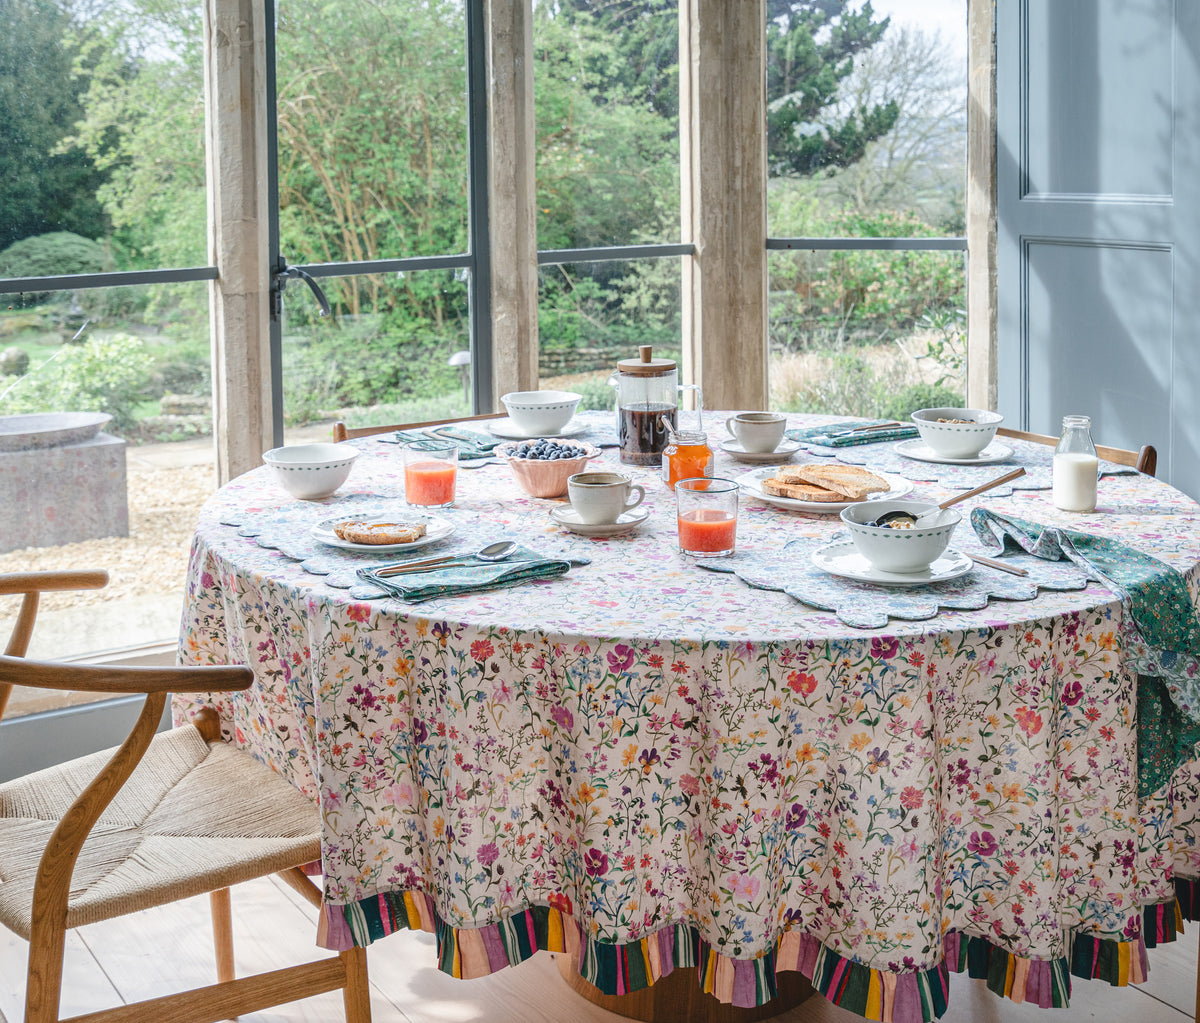 Linen Garden Liberty fabric used by Coco & Wolf across table linen, bedding and homewares.